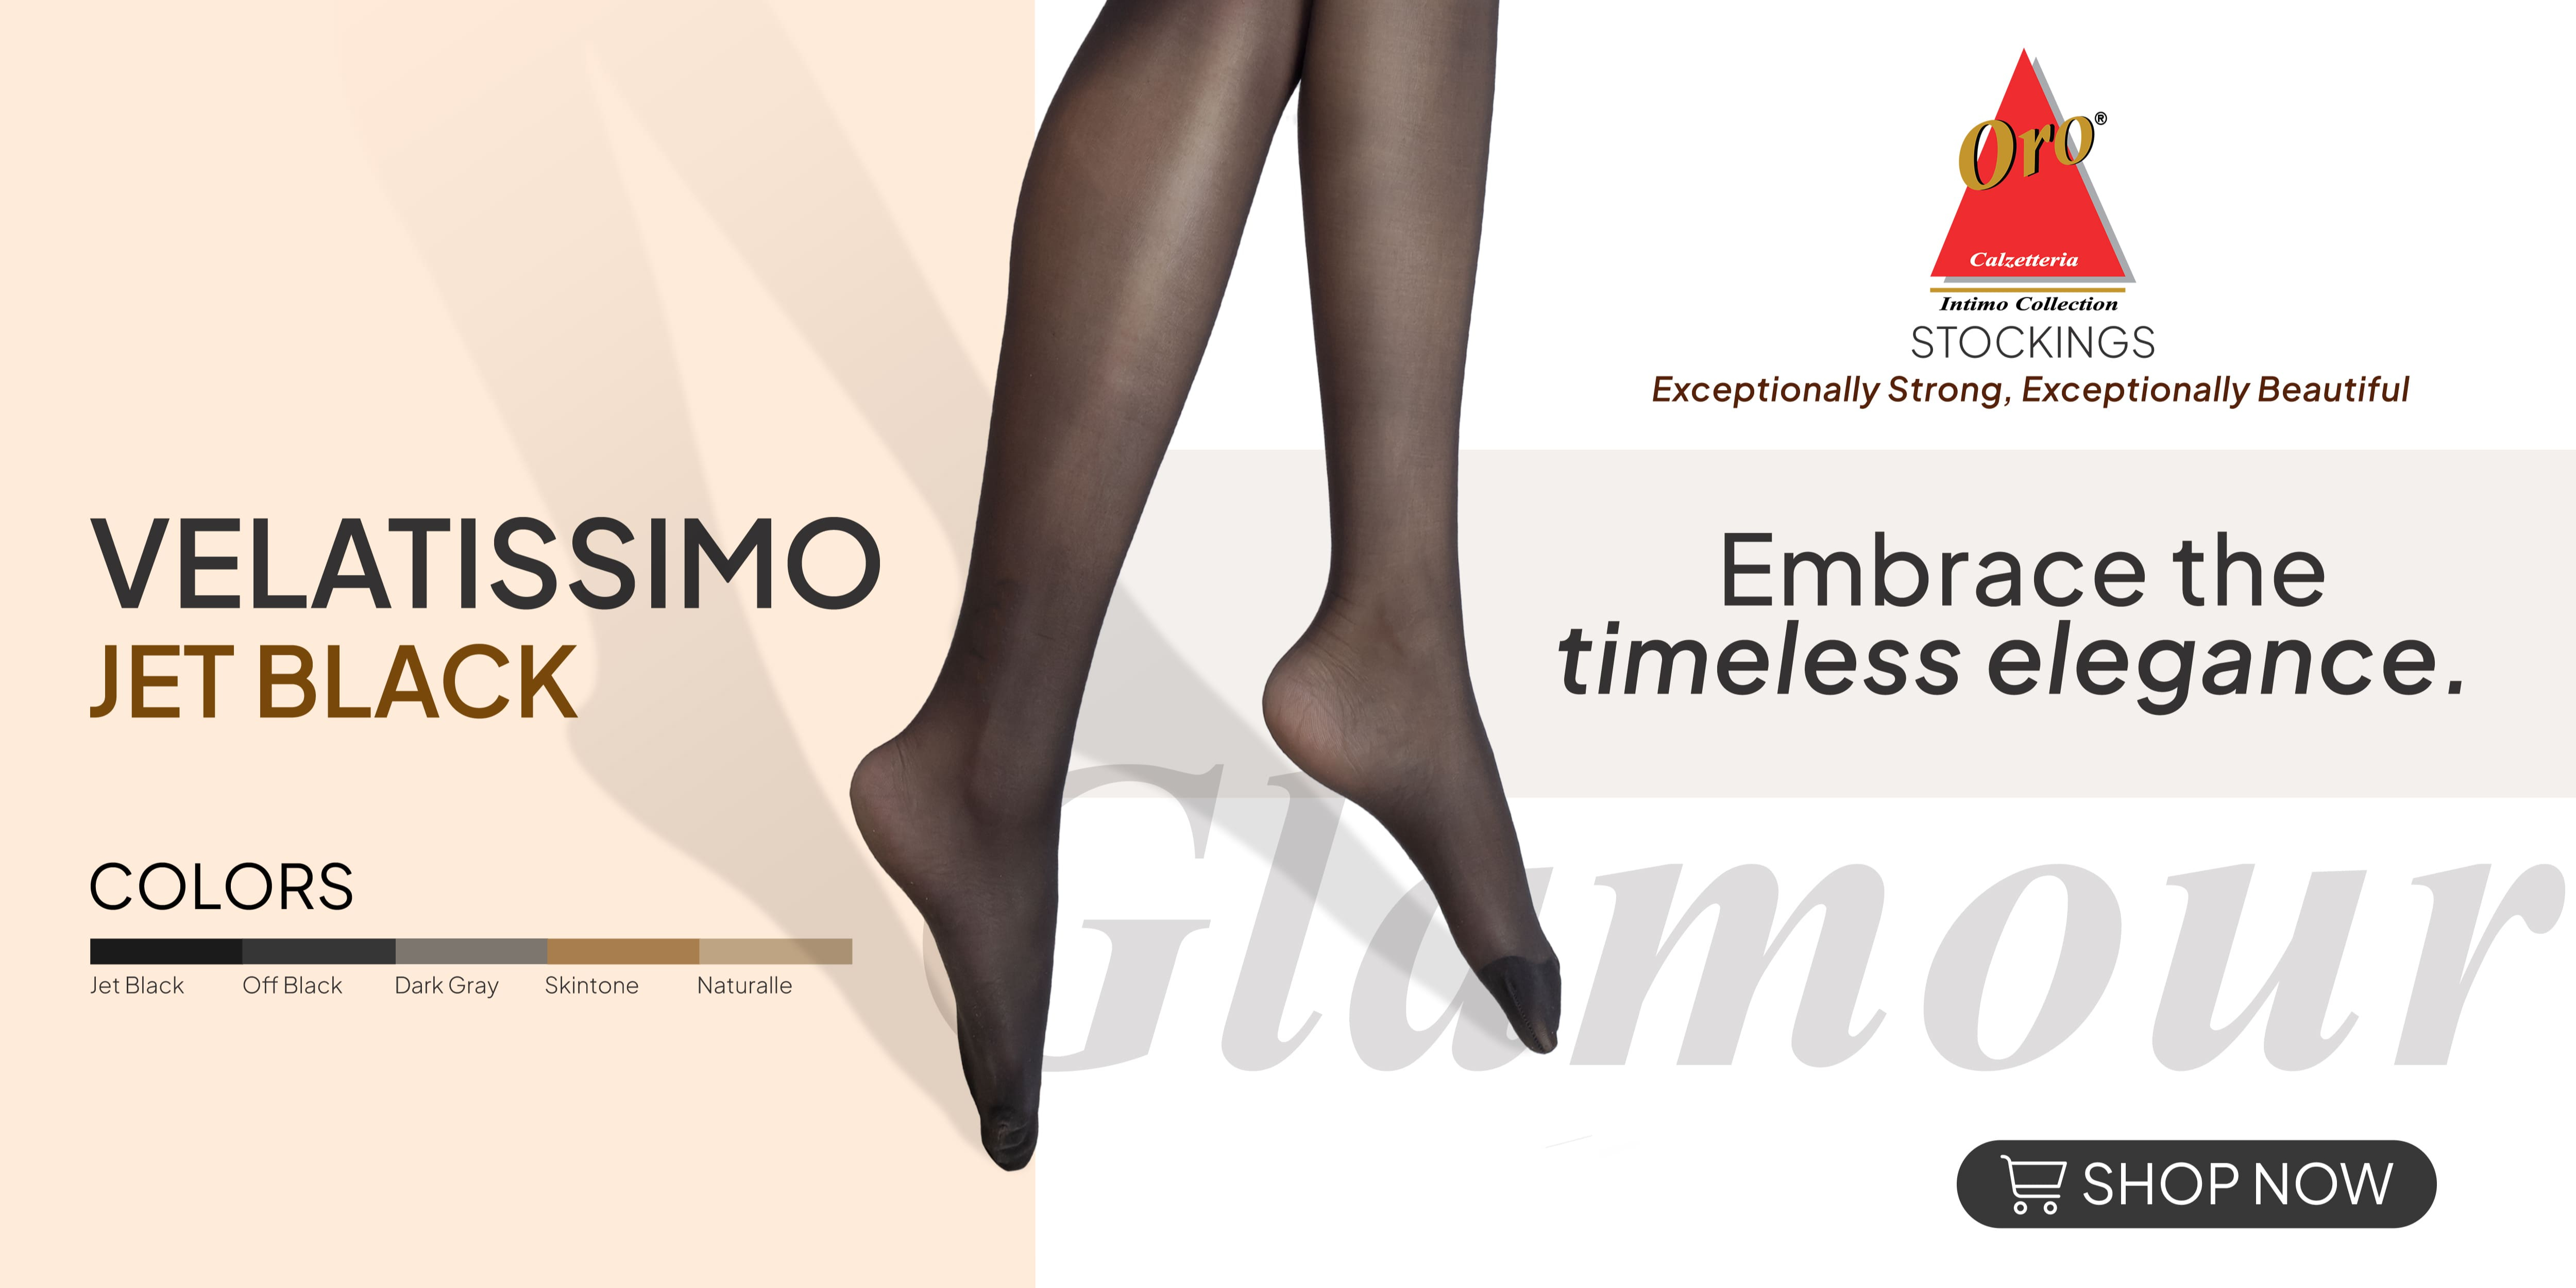 ORO INTIMO, Silky Support Super Stretch Pantyhose Naturalle